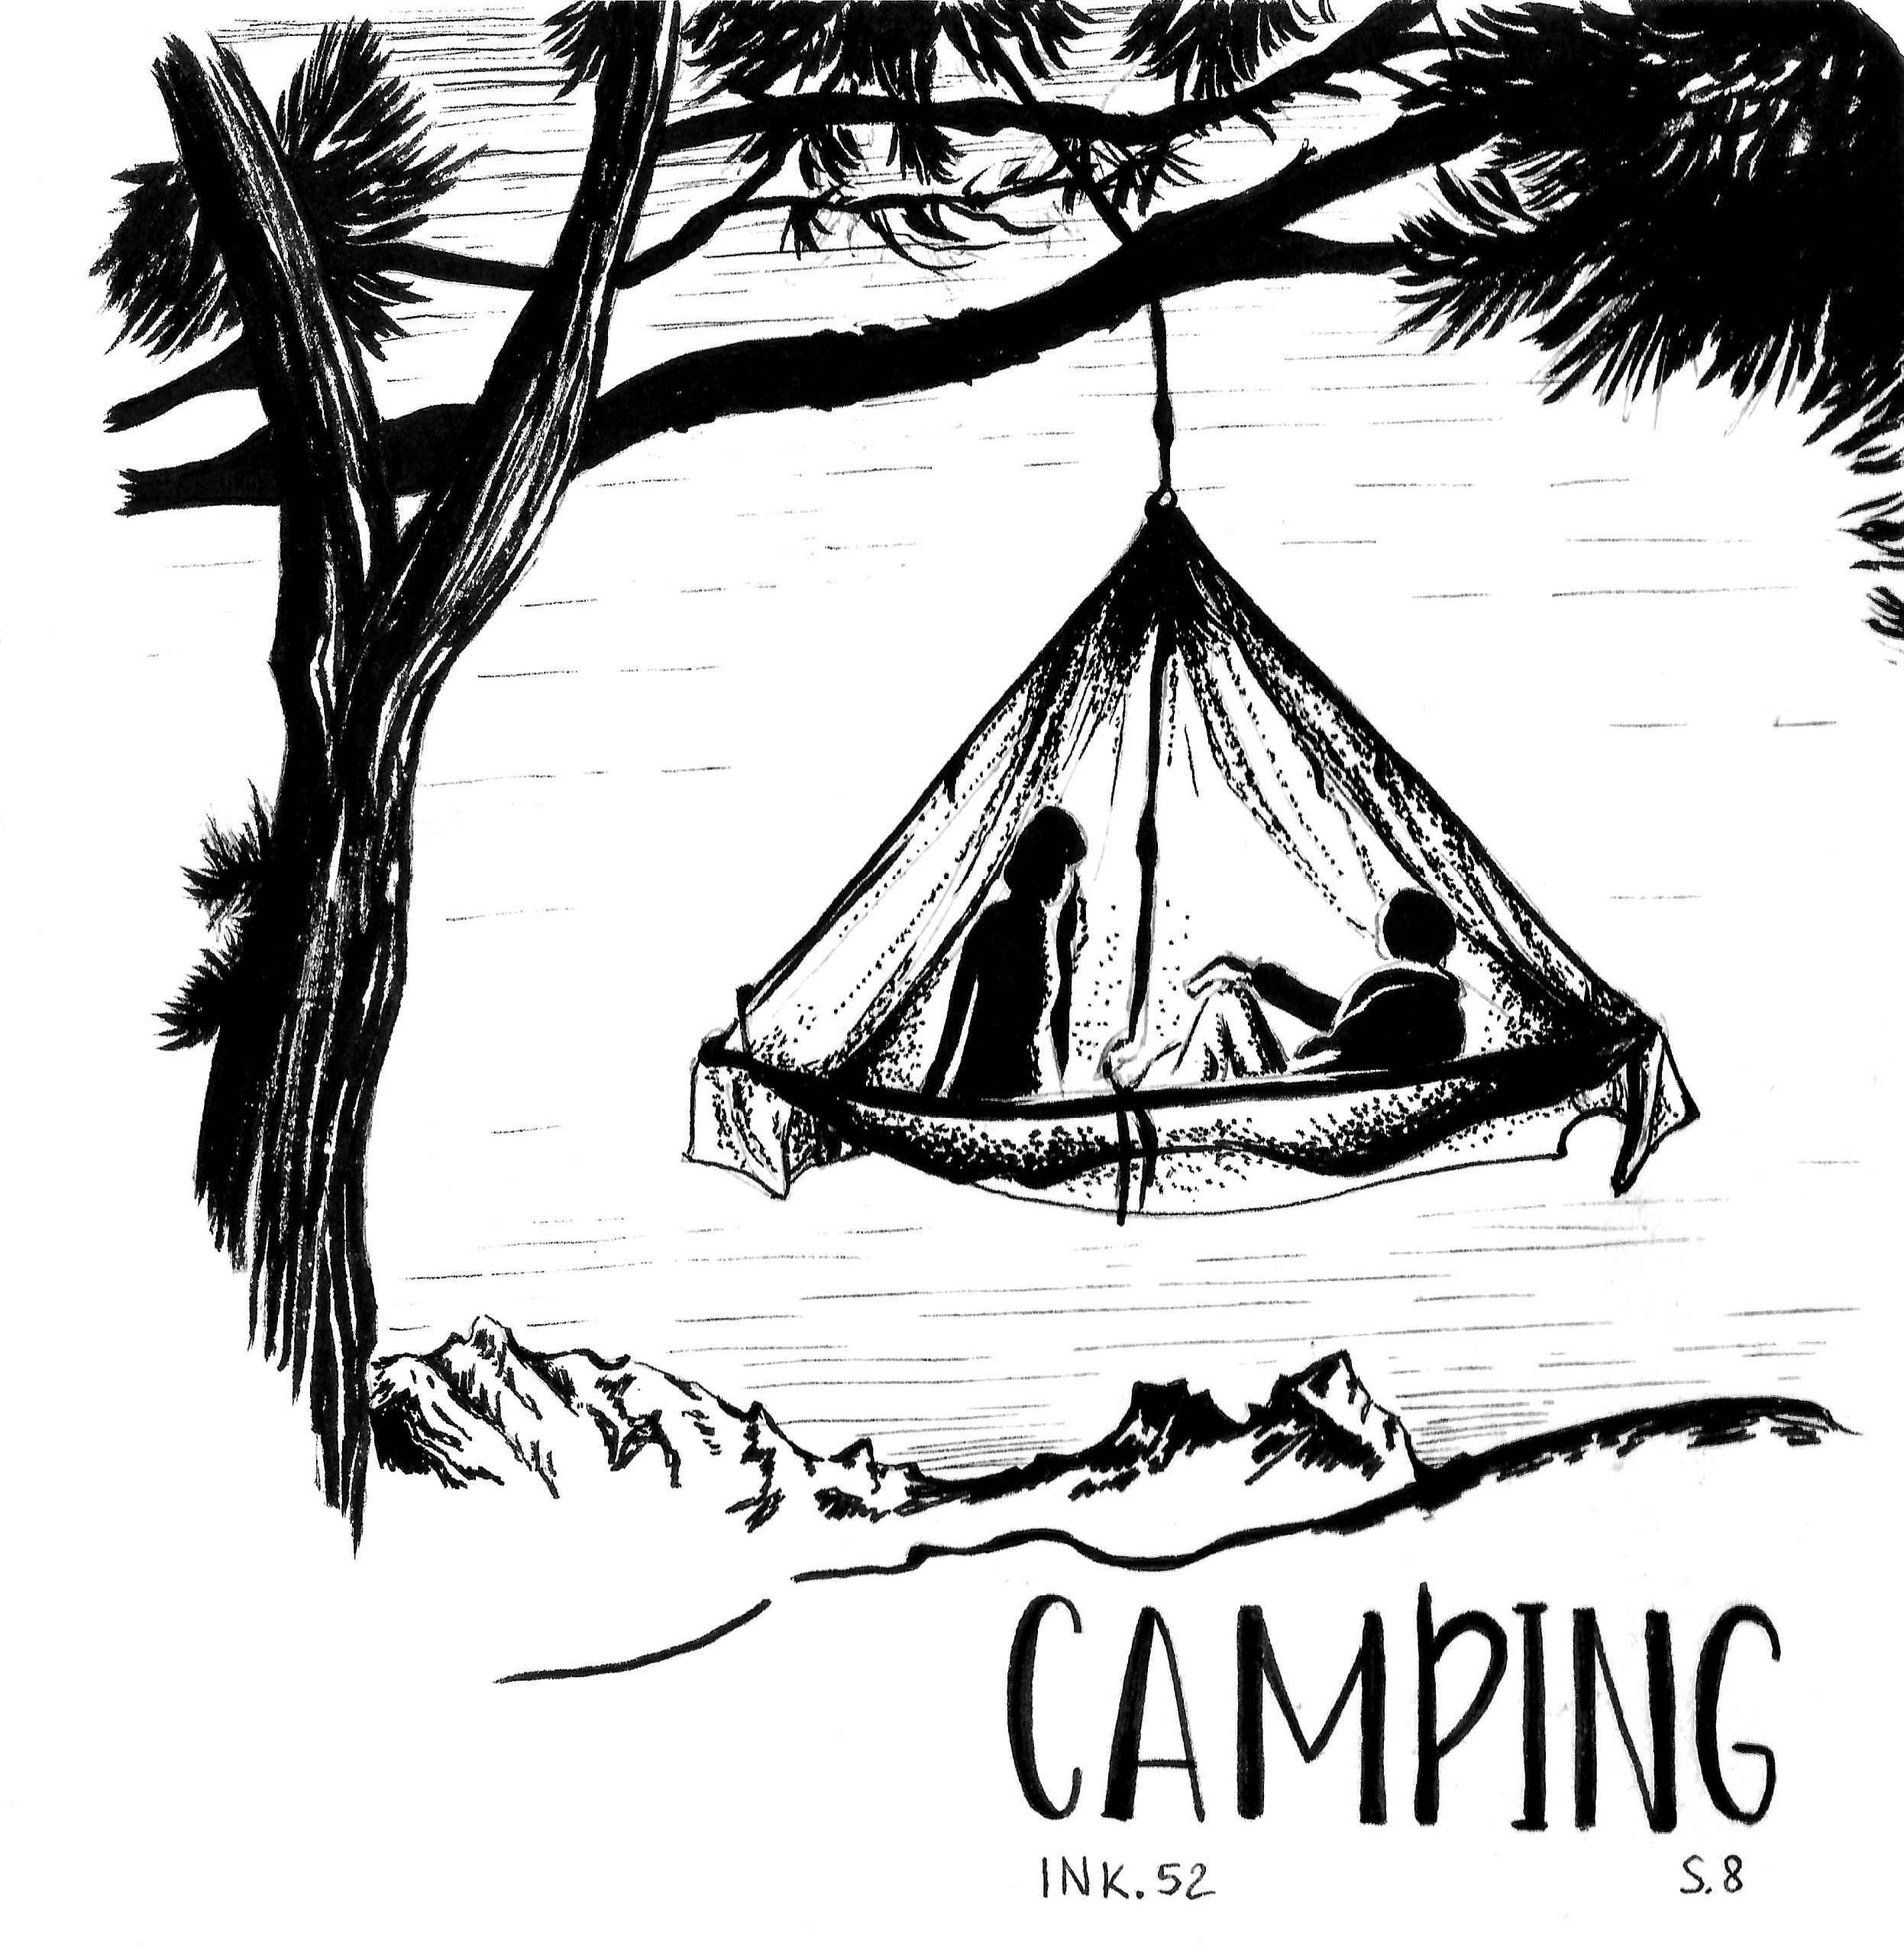 S.8 CAMPING